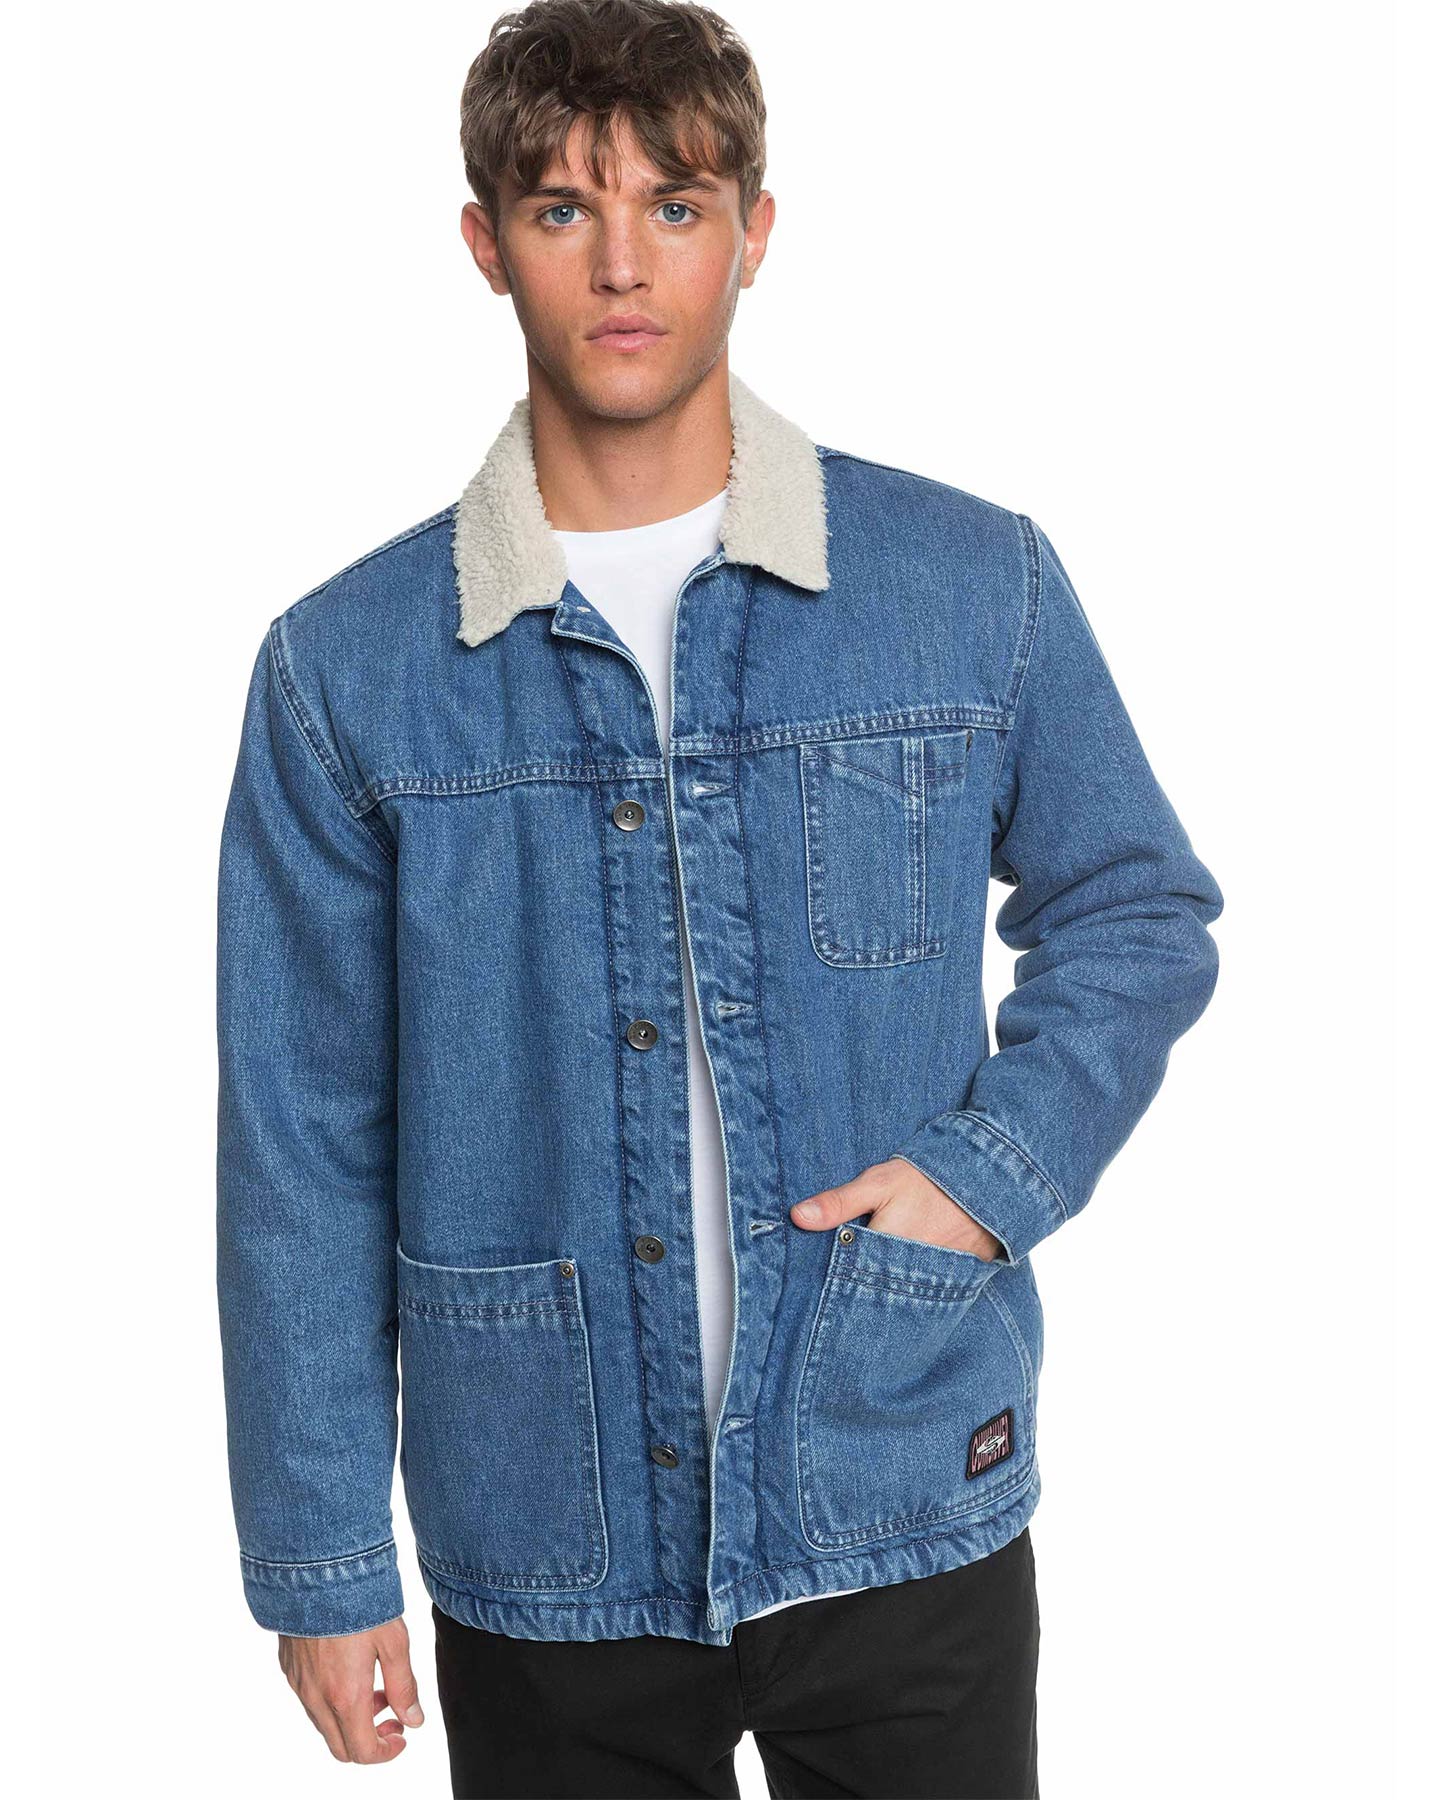 mens jean jacket with sherpa